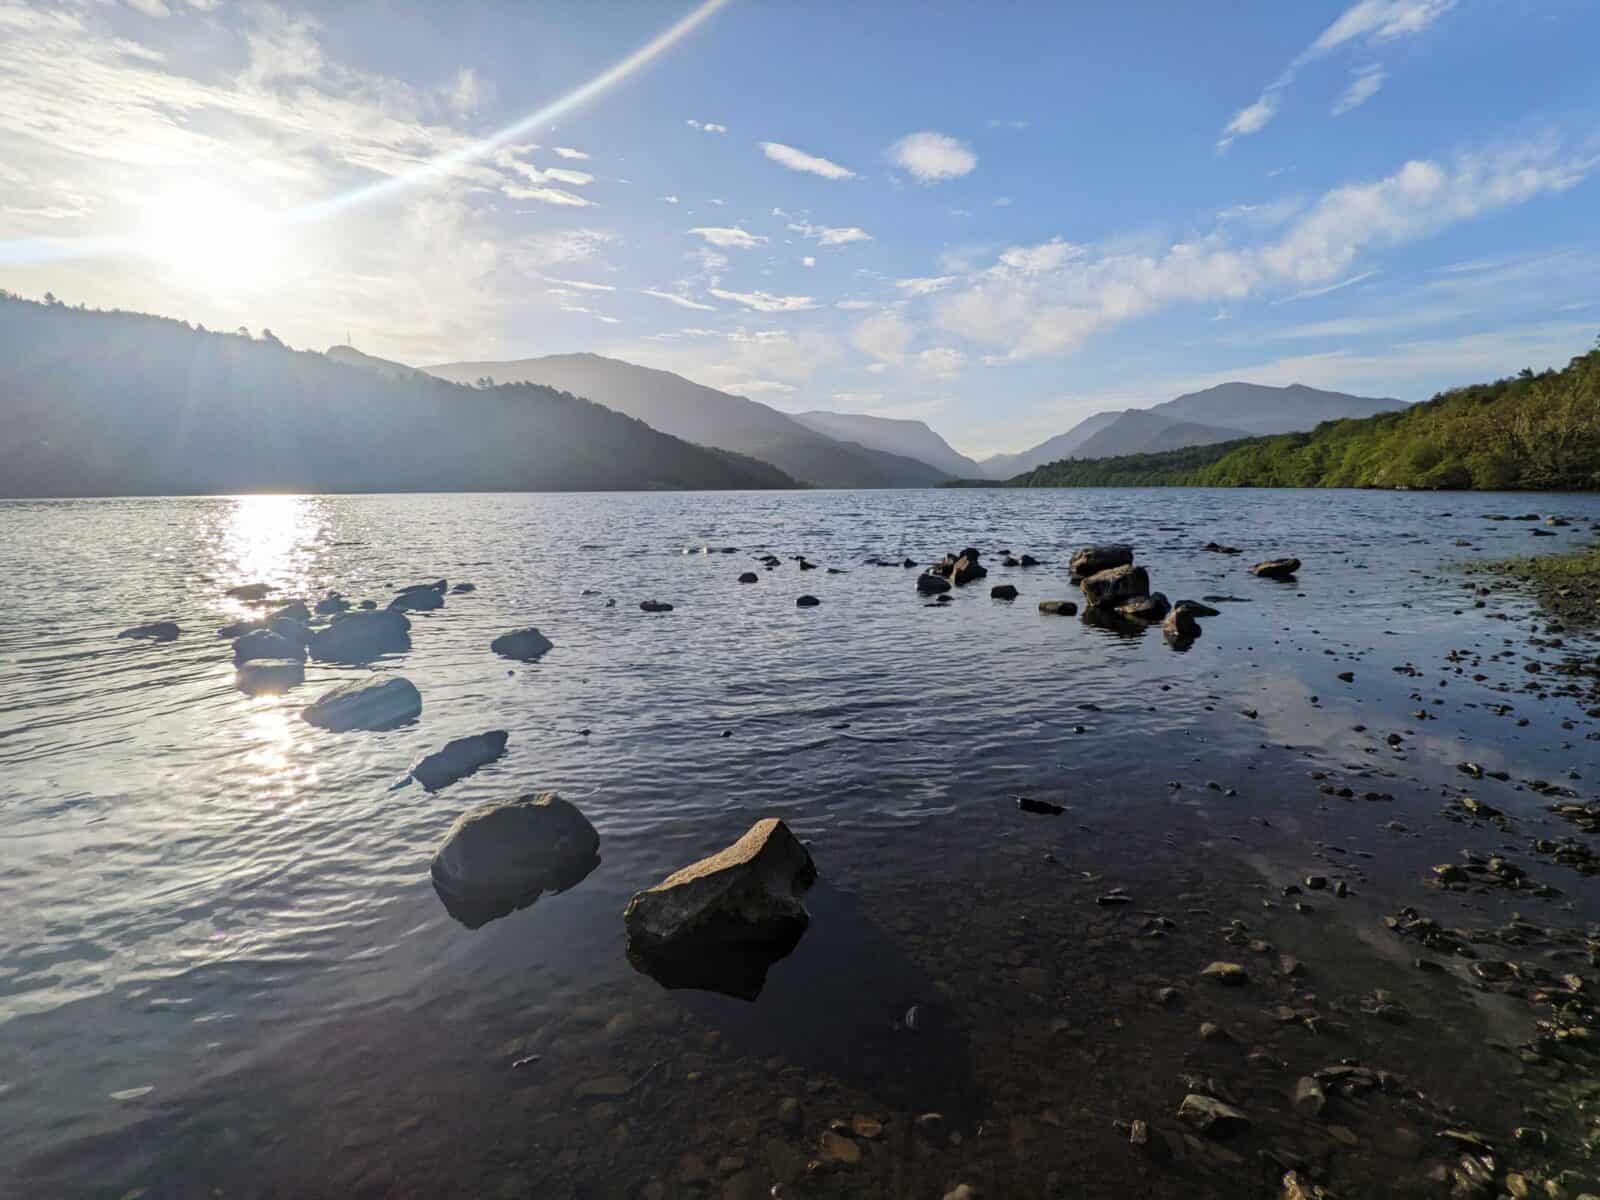 A photo from the shore of Llyn Padarn